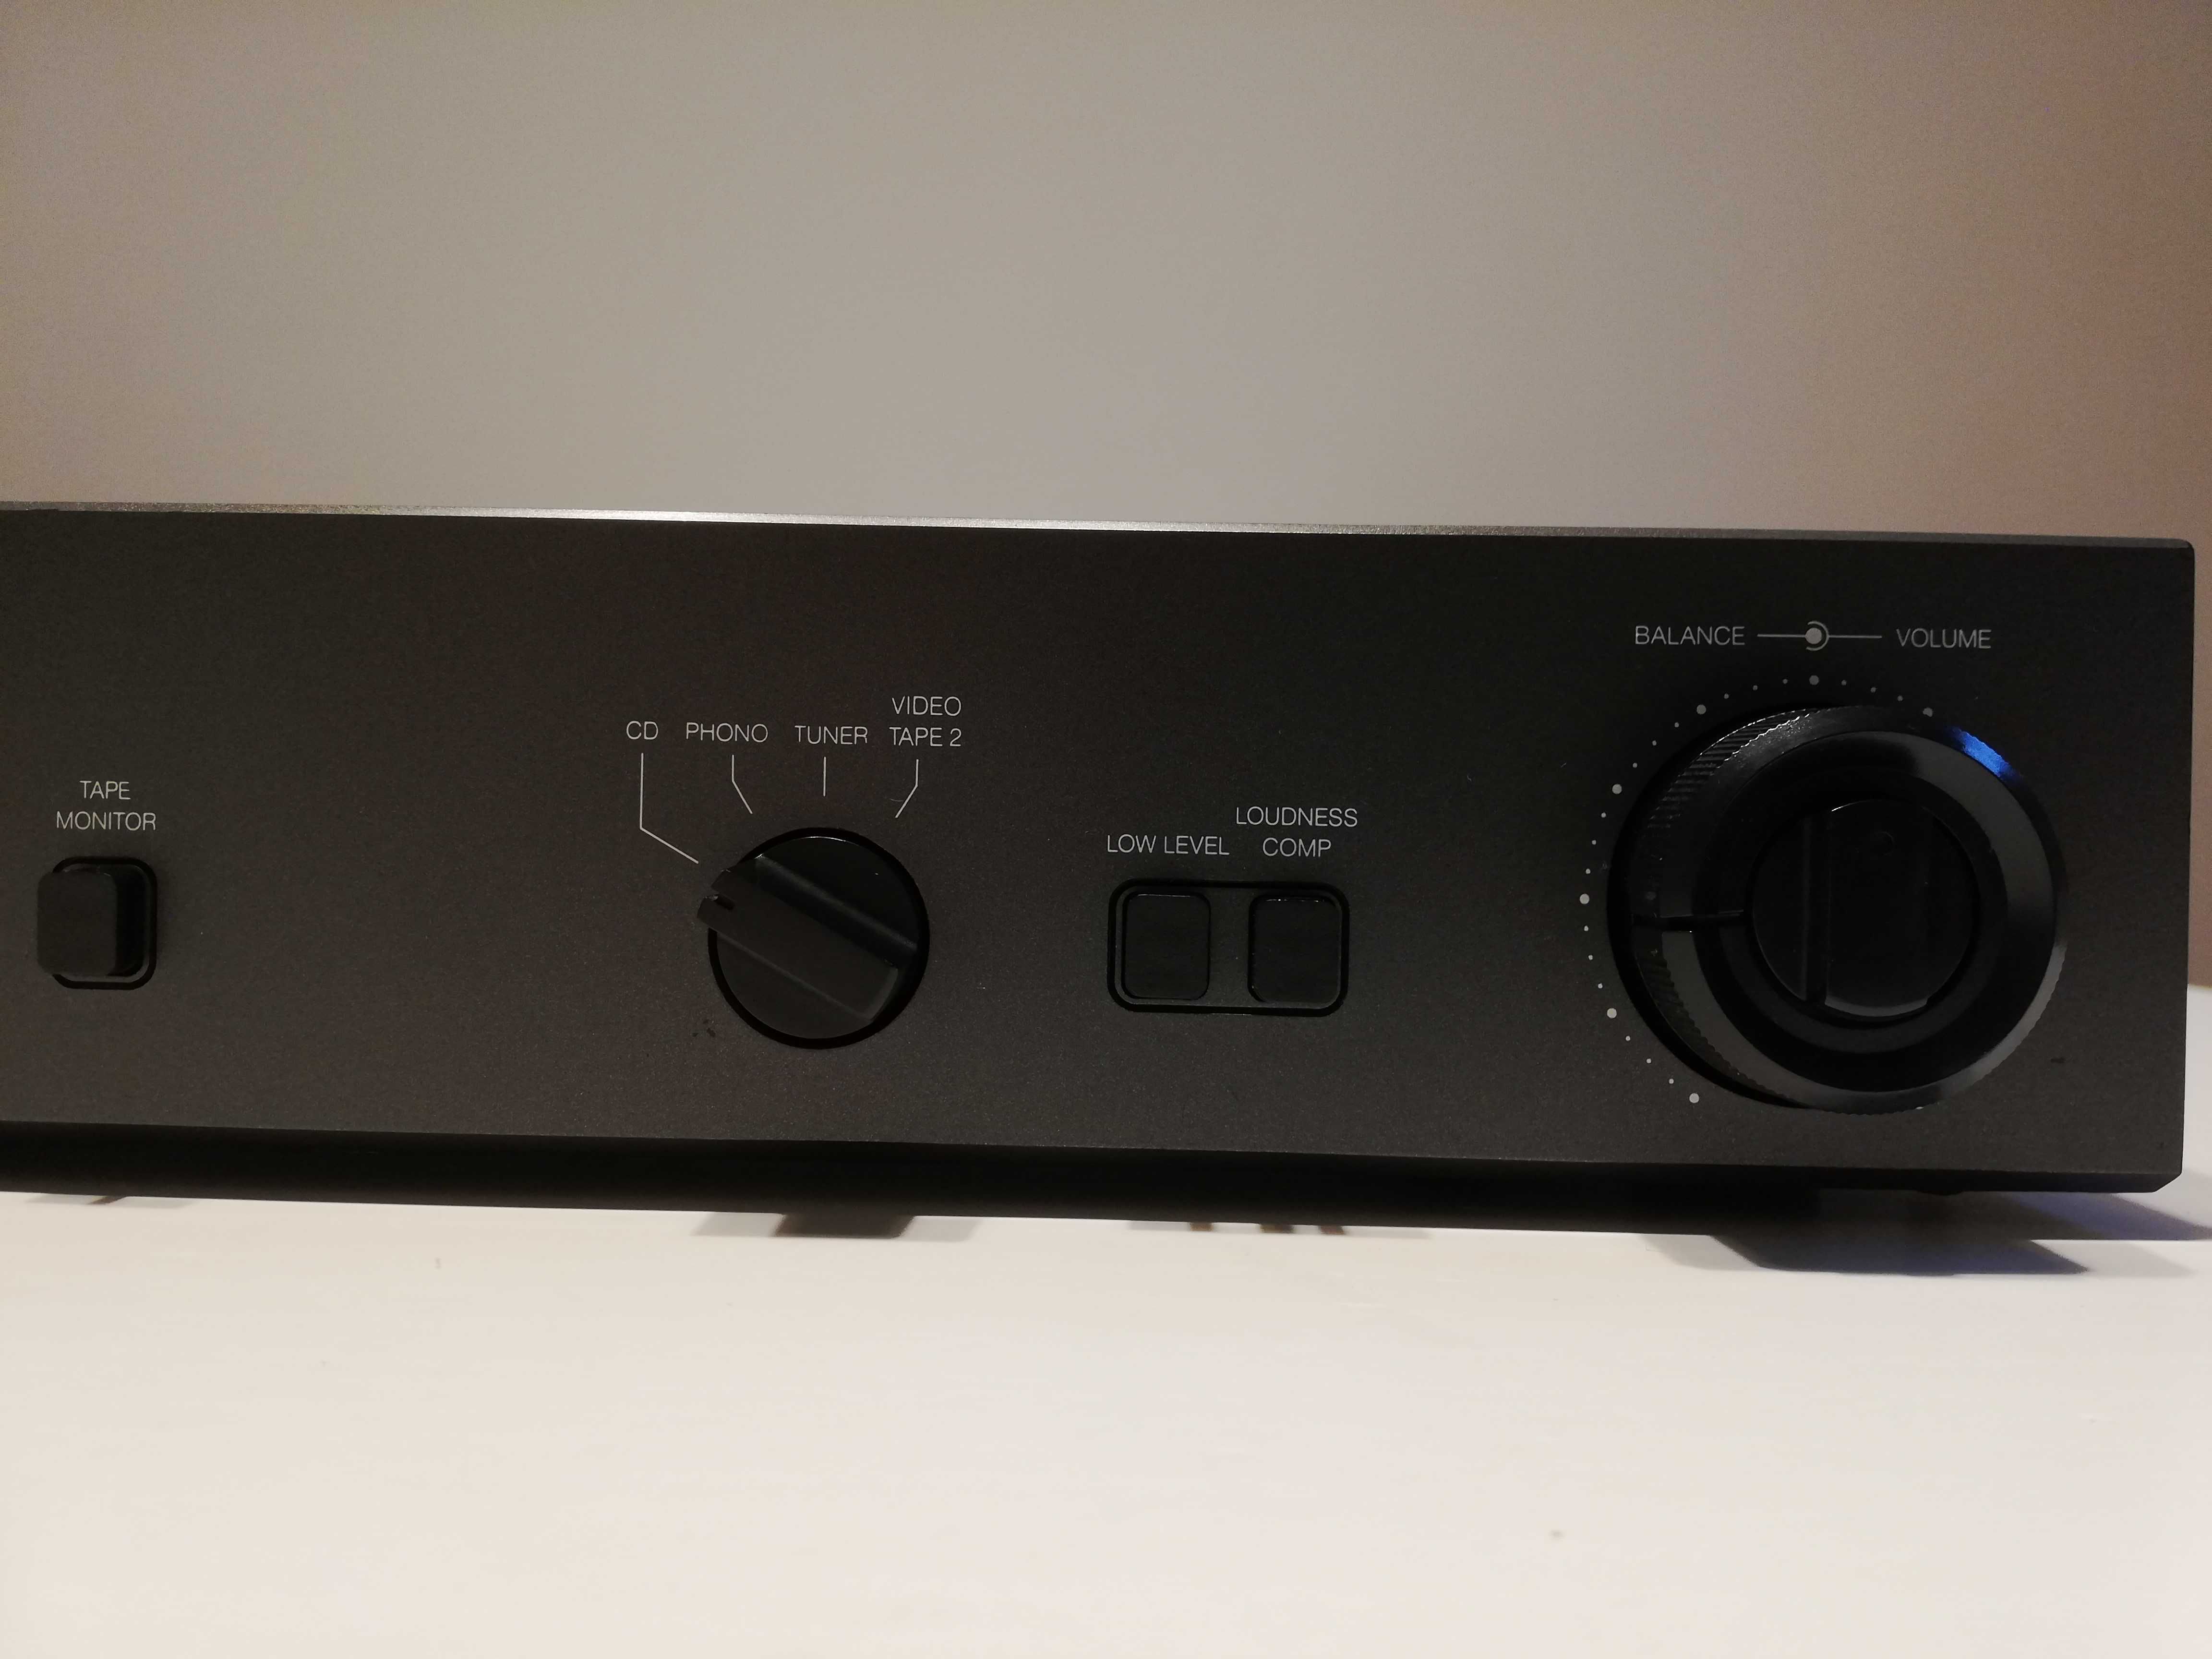 Preamplificator Stereo marca NAD model 1130 - Impecabil/Taiwan